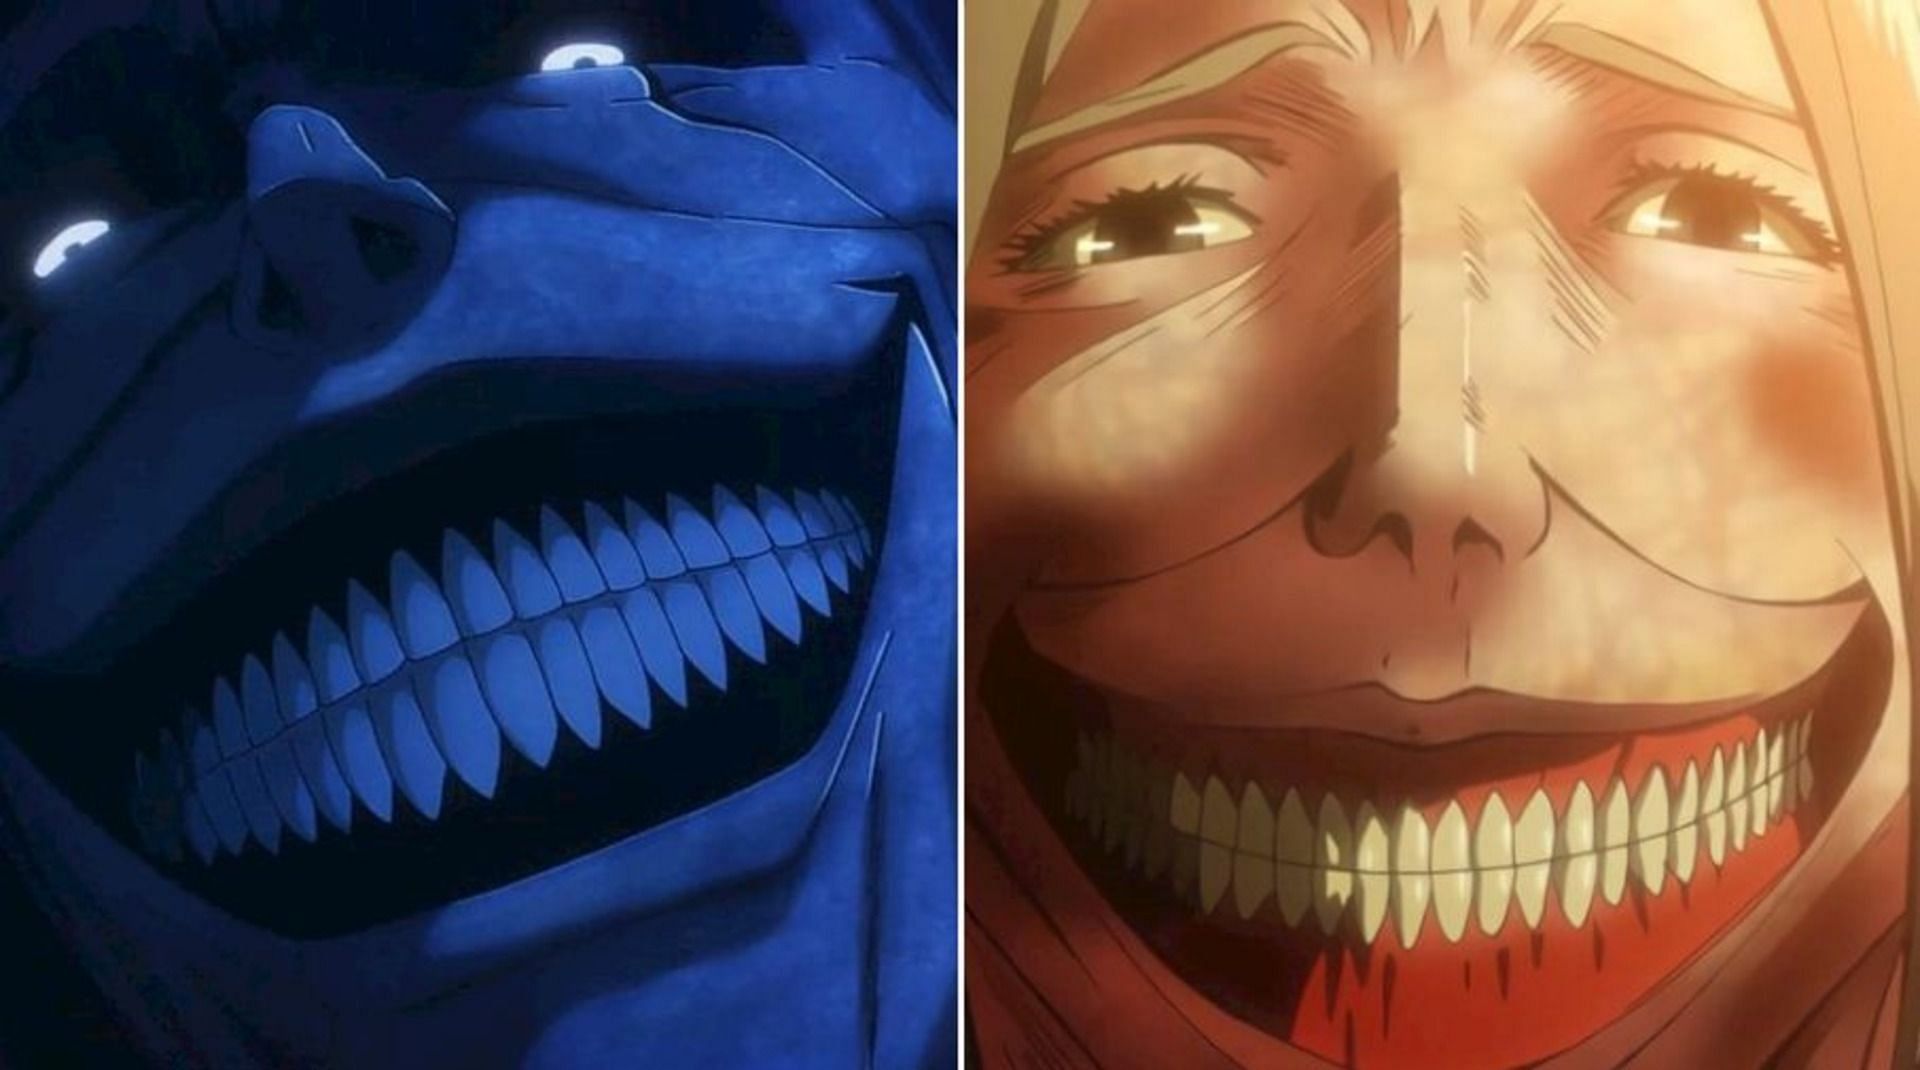 Which anime character has the purest smile? - Quora